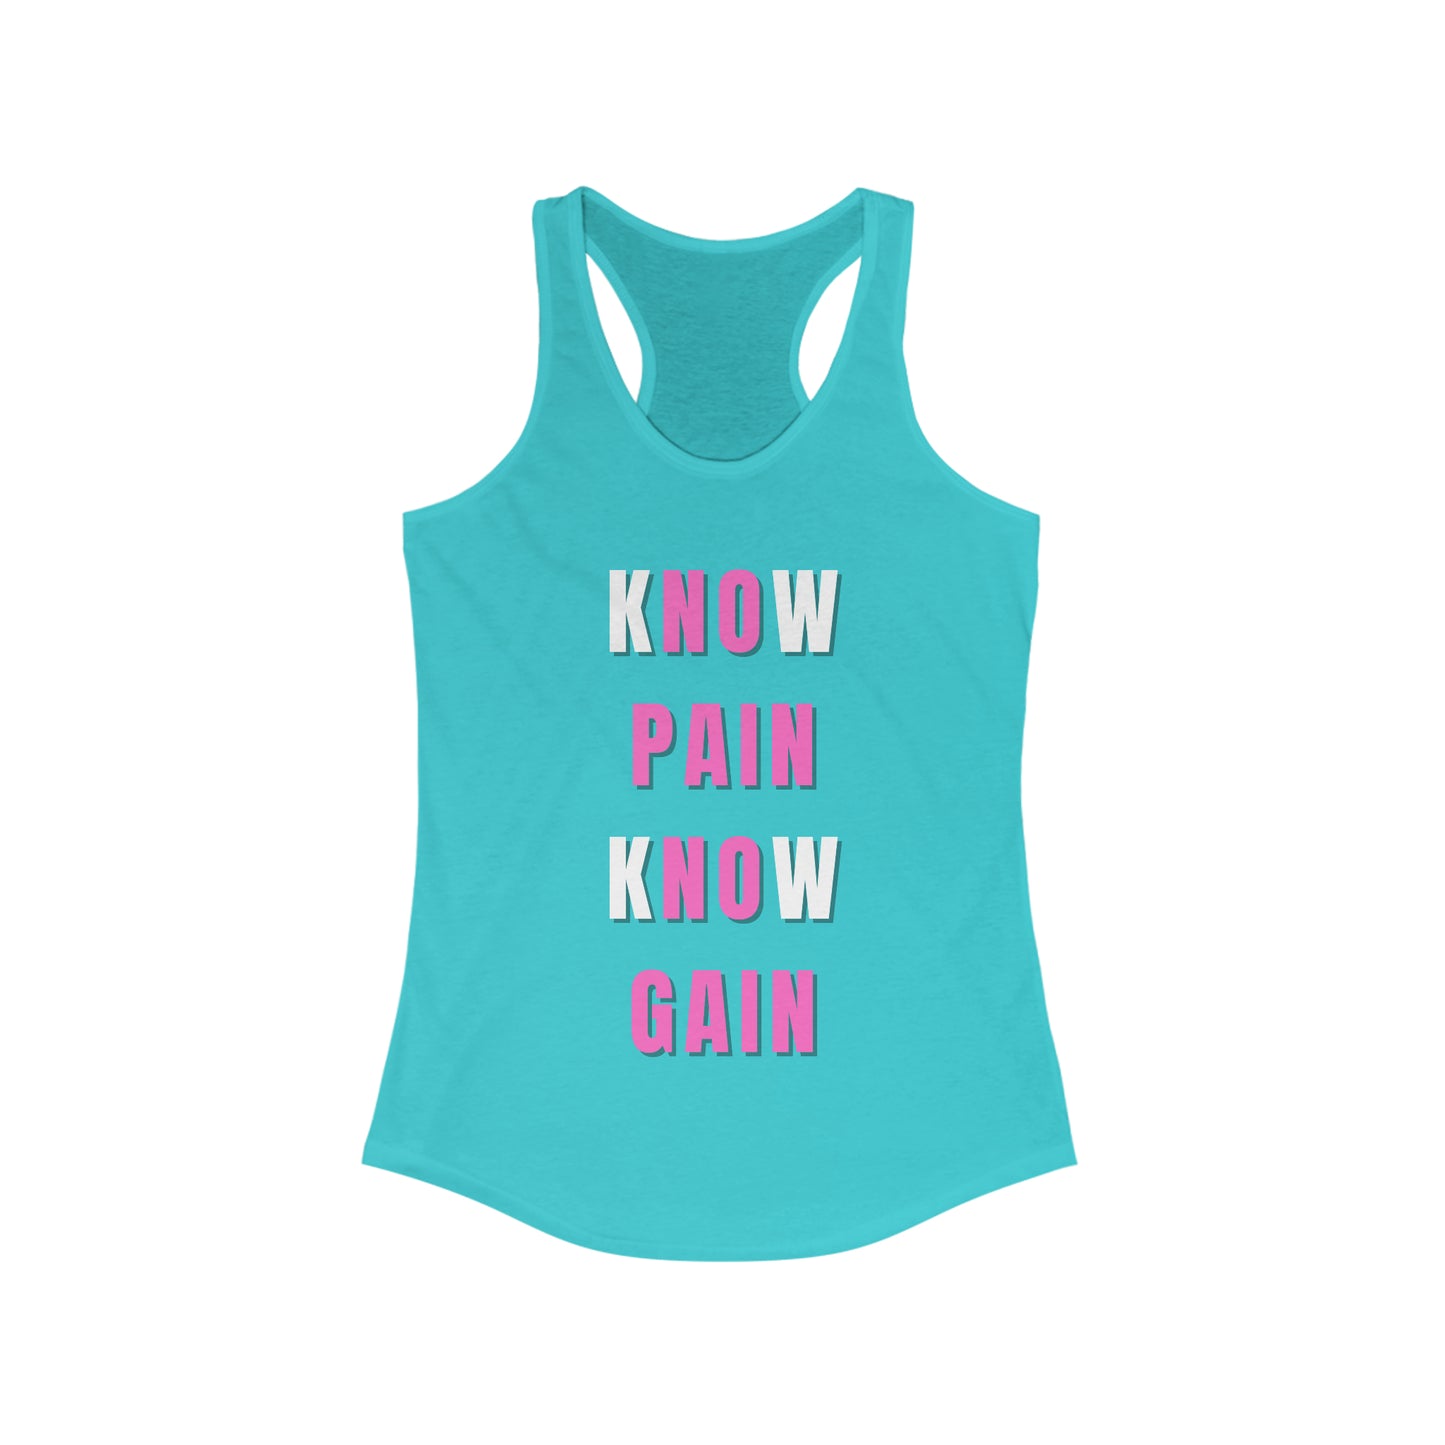 Know Pain Know Gain Trendy Women's Tank Top